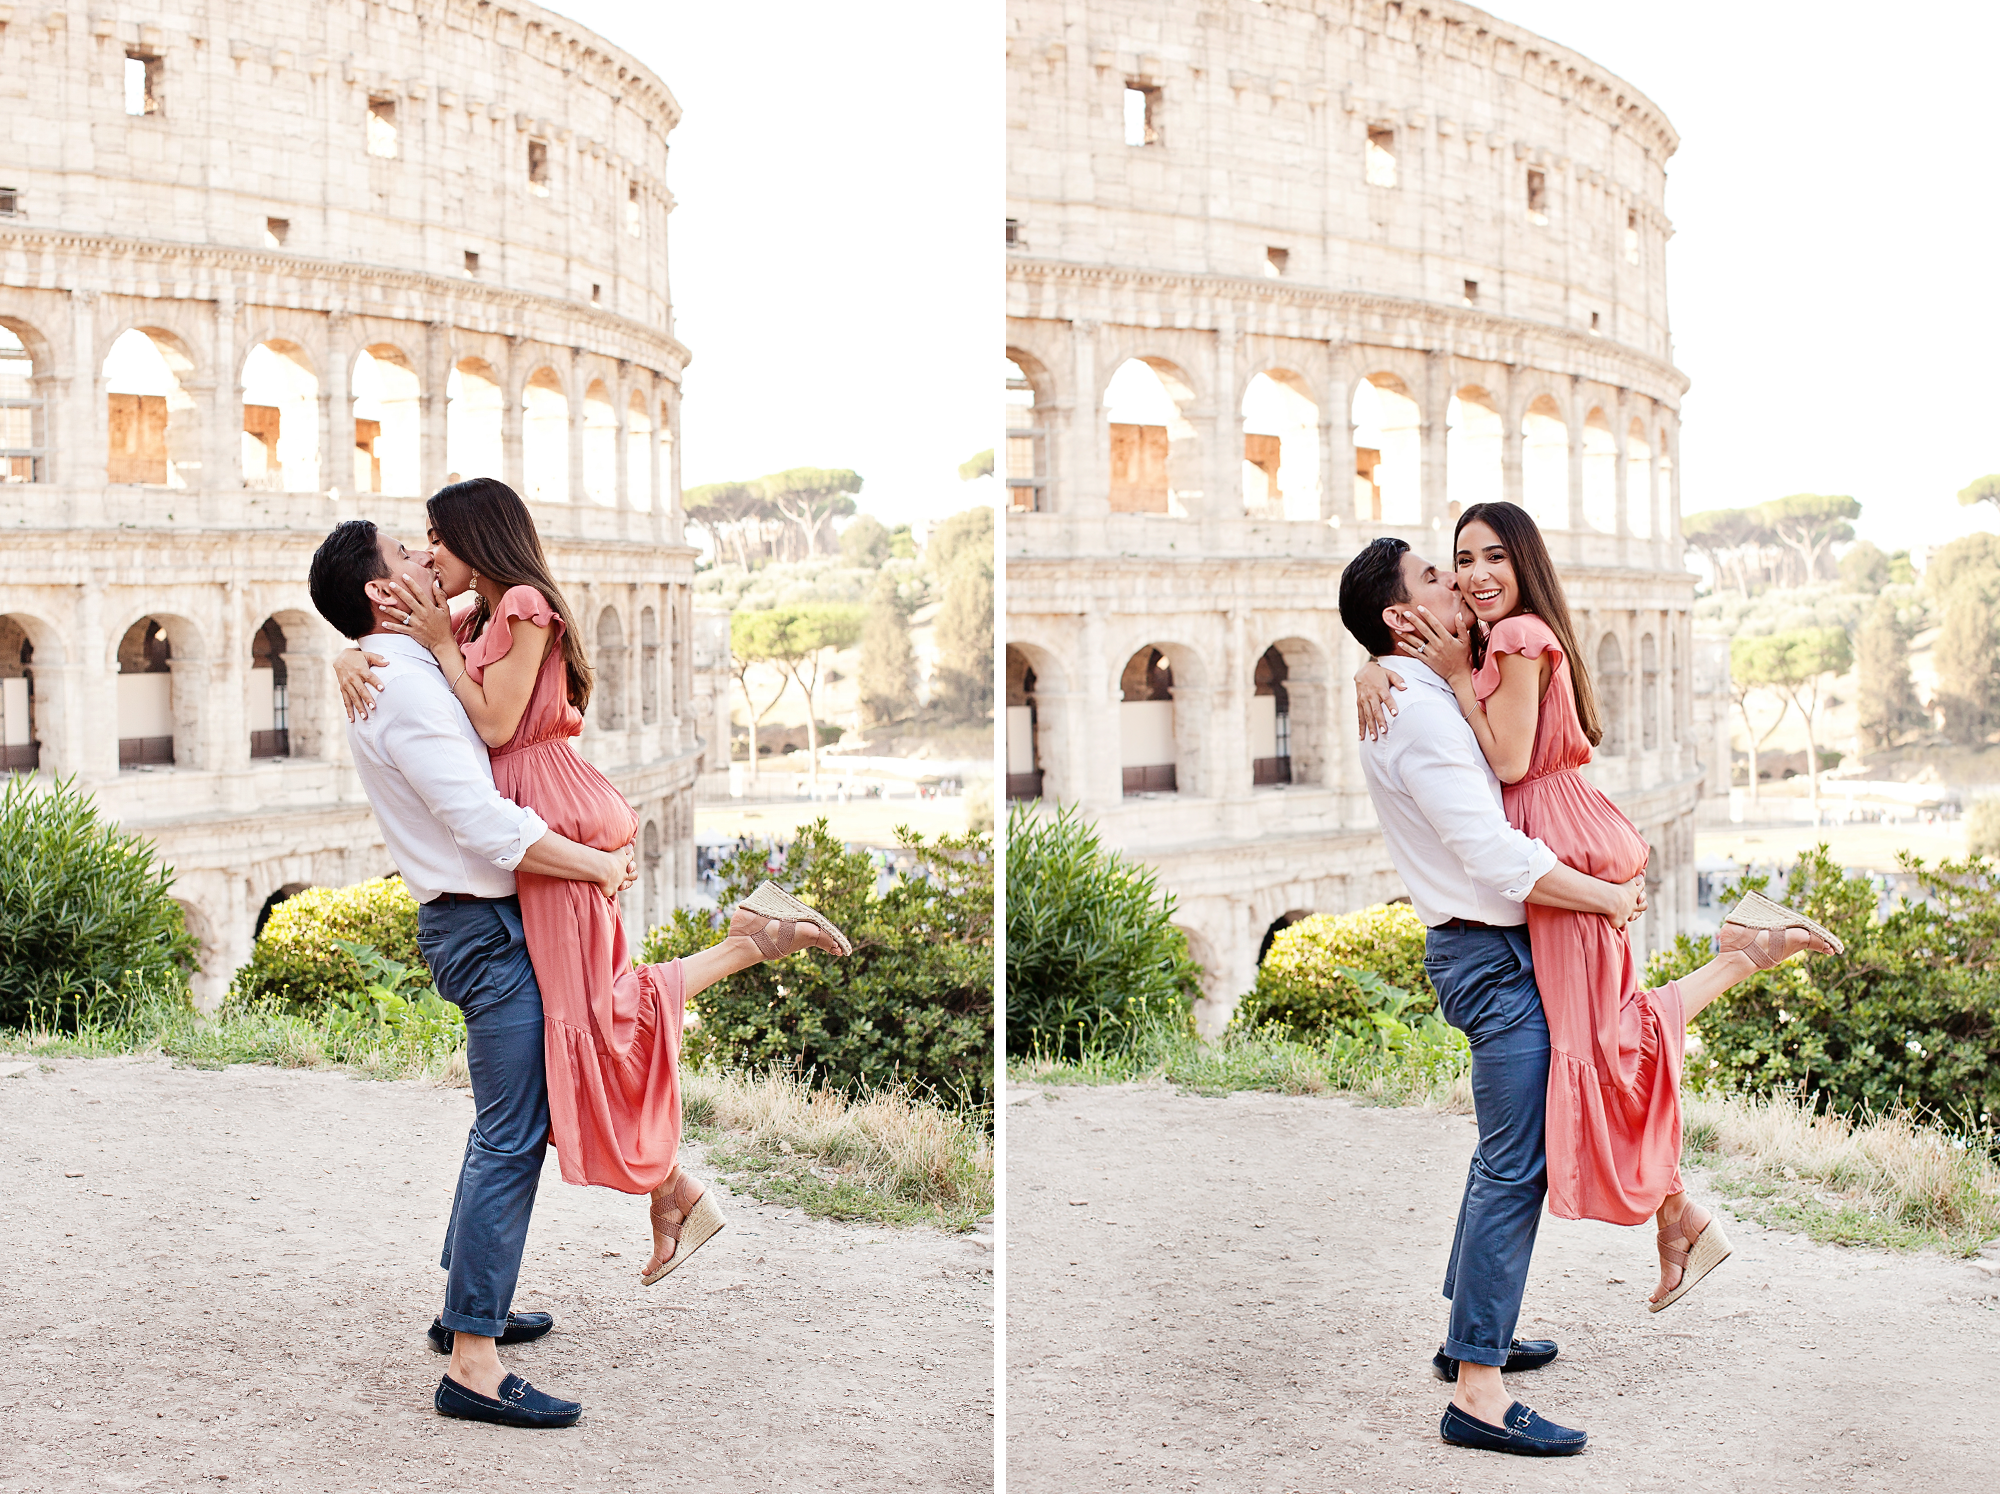 Honeymoon, vacation, family, engagement, maternity, wedding, love story individual and solo photoshoots in Rome, Italy by photographer Tricia Anne Photography | Rome Photographer, vacation, Rome Anniversary Photoshoot, Pantheon, piazza Navona, Centro Storico Photo Shoot, photo shoot in rome, Rome Vacation Photographer, English speaking photographer in Rome